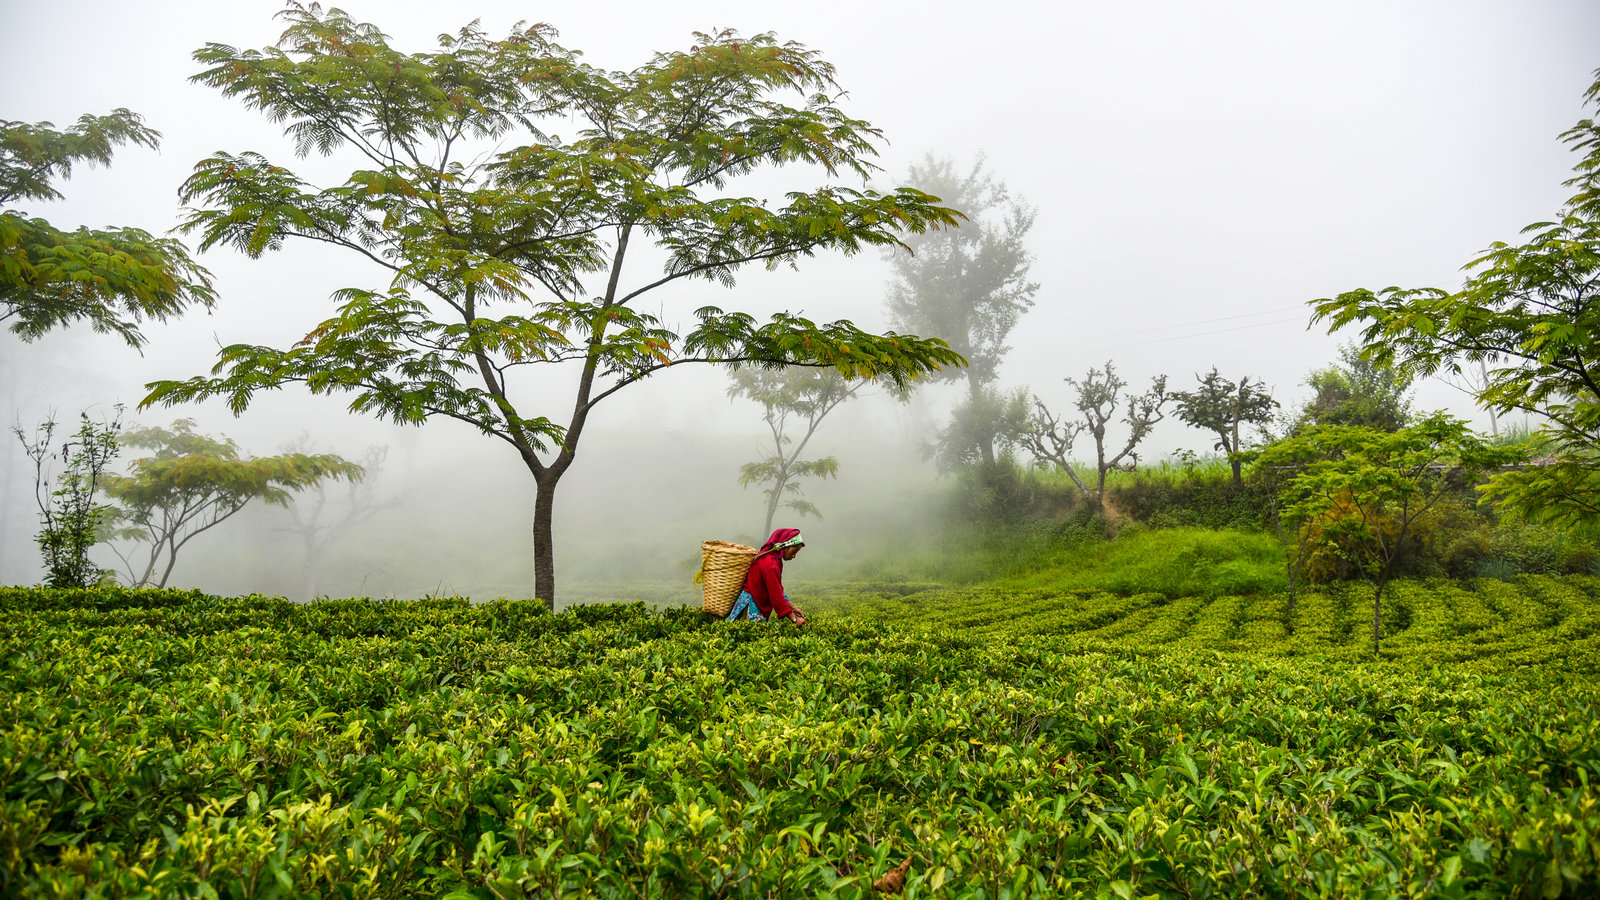 Koshi State exports tea leaves worth Rs 2.6 billion in first three months of current fiscal